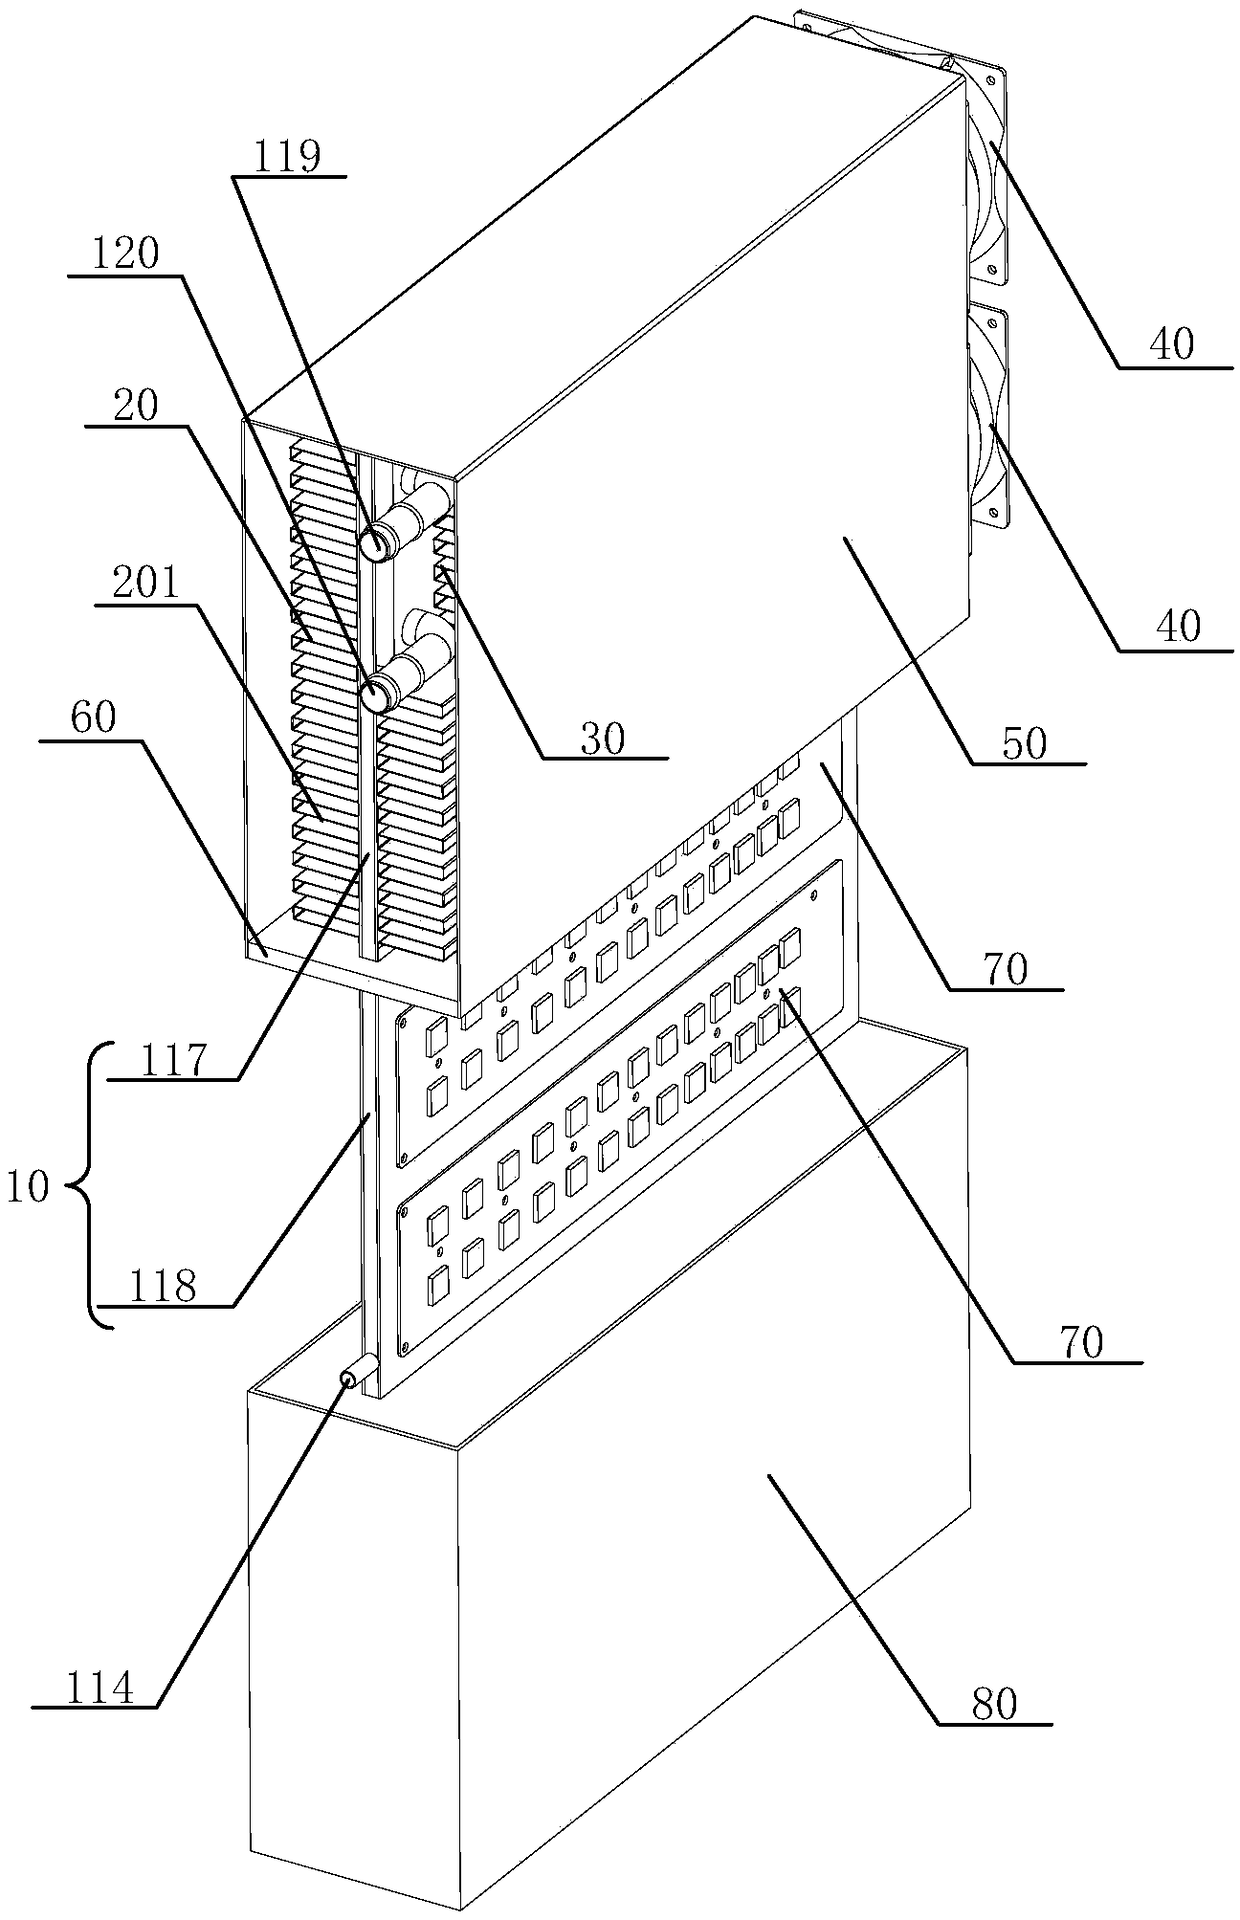 Air-cooled liquid-cooled combined thermally superconducting plate radiator